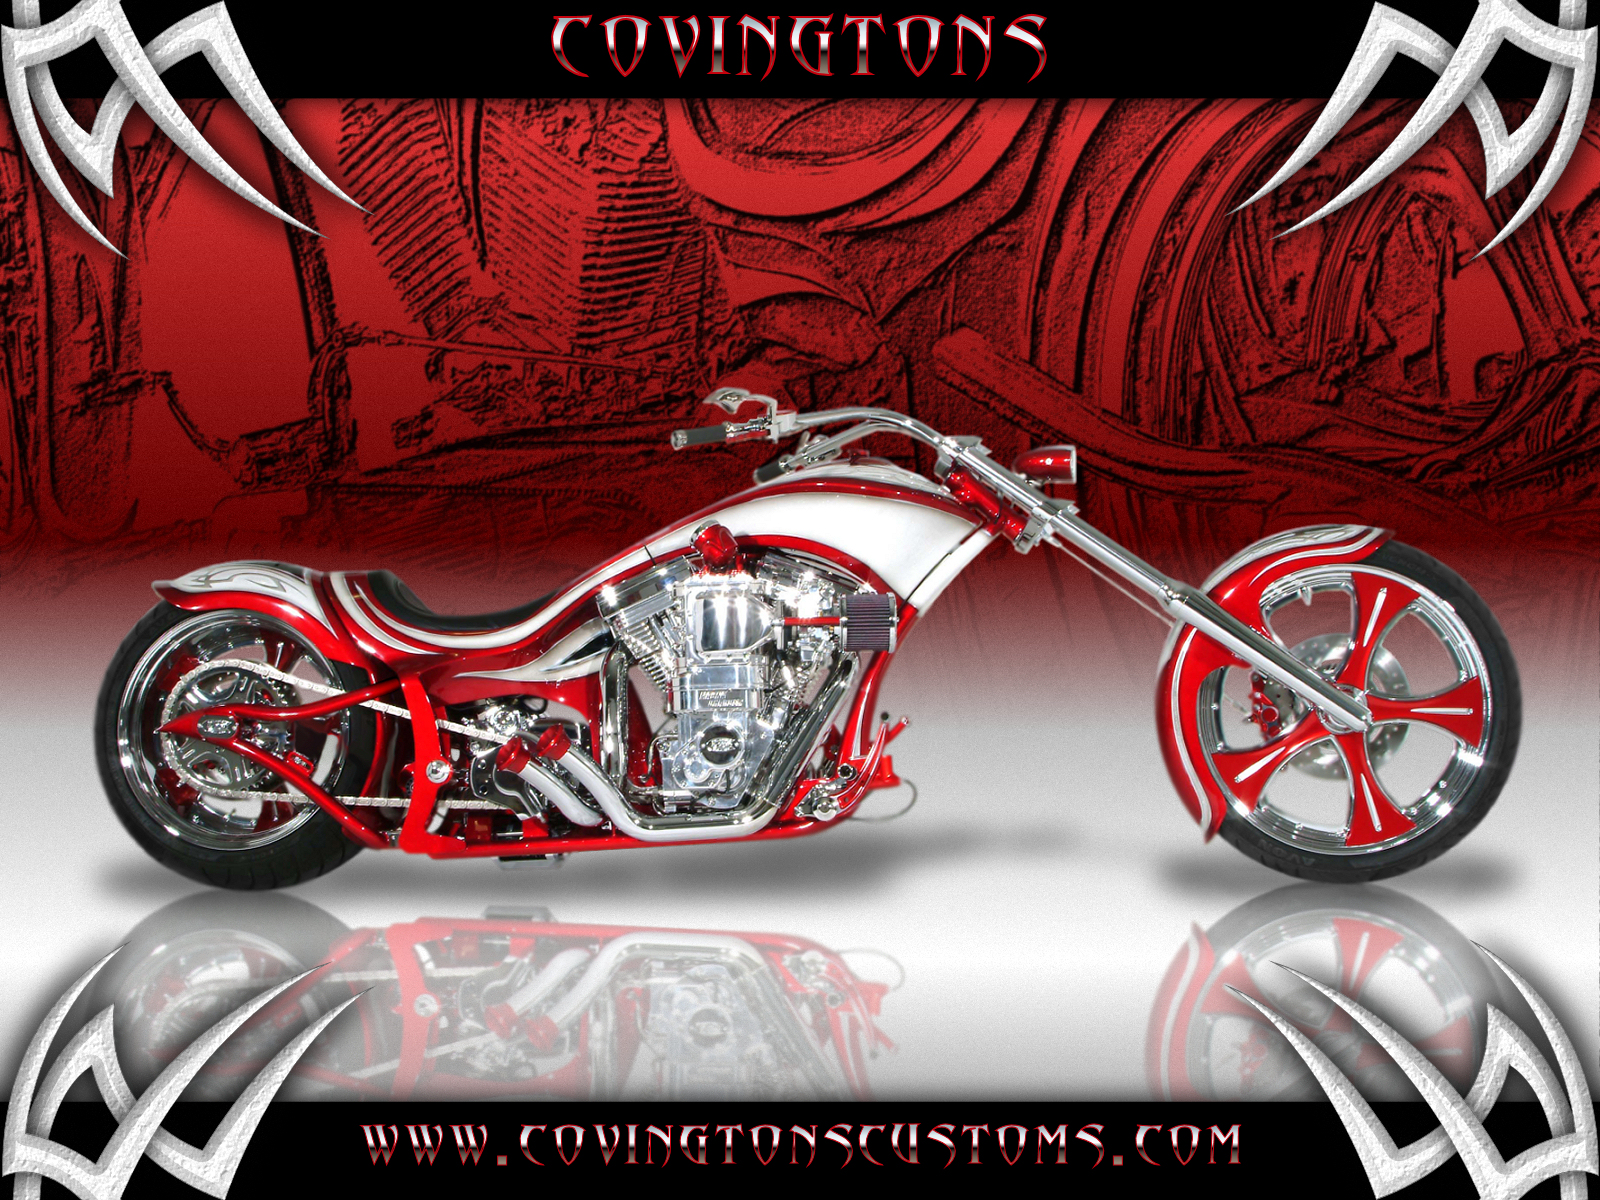  Bikes For Sale Custom Motorcycles Custom Cars Links Events Contact